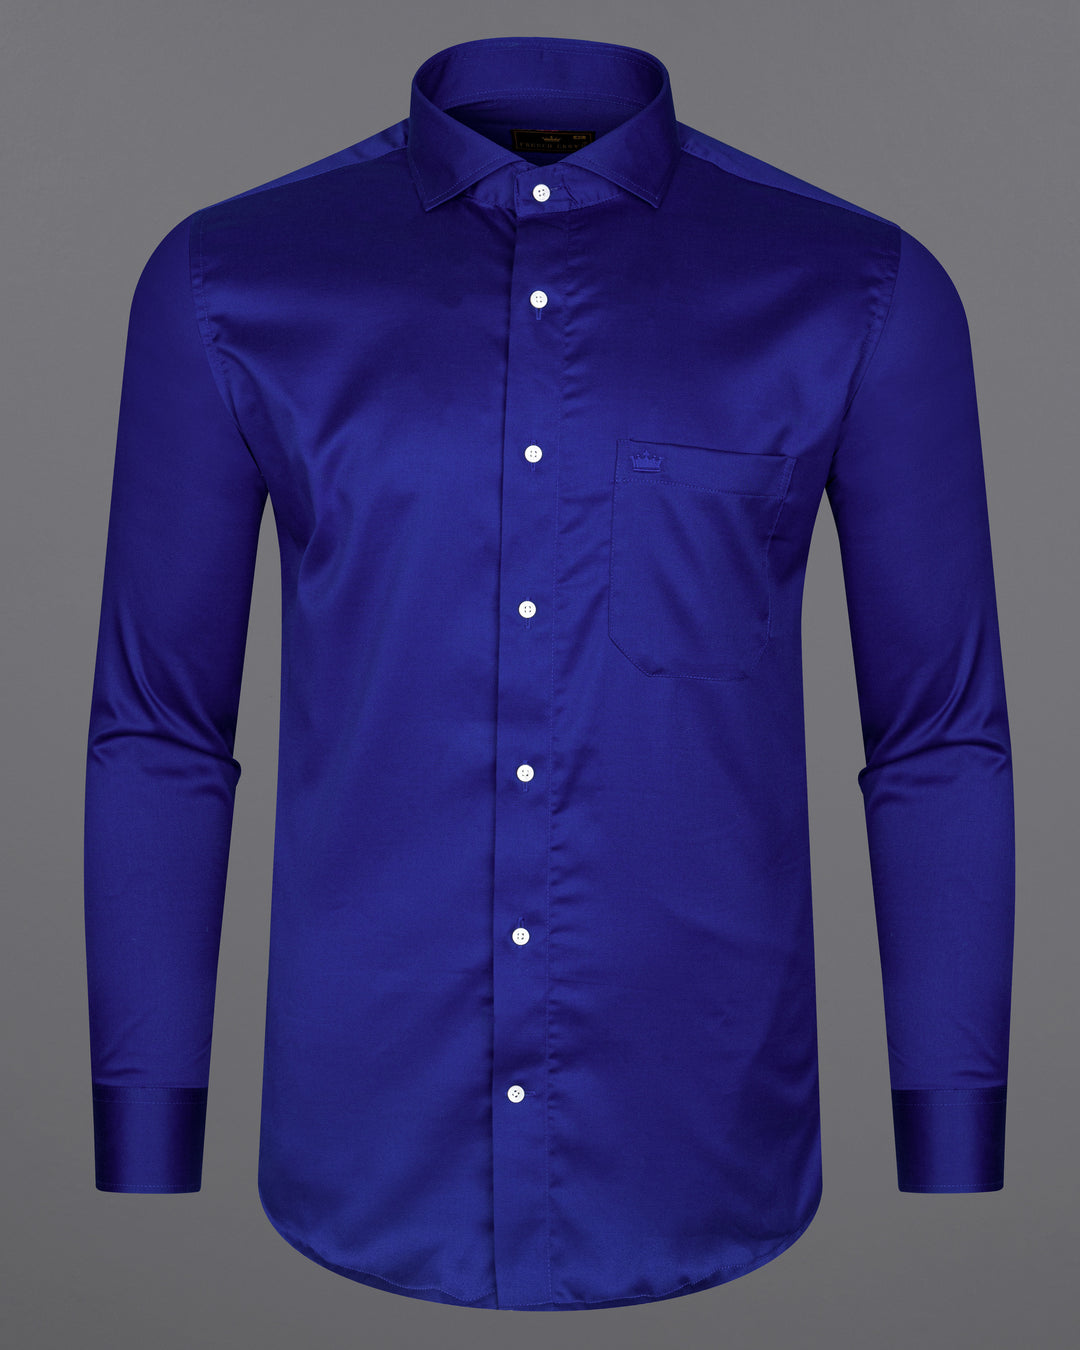 Navy Blue Shirt With Grey Pants